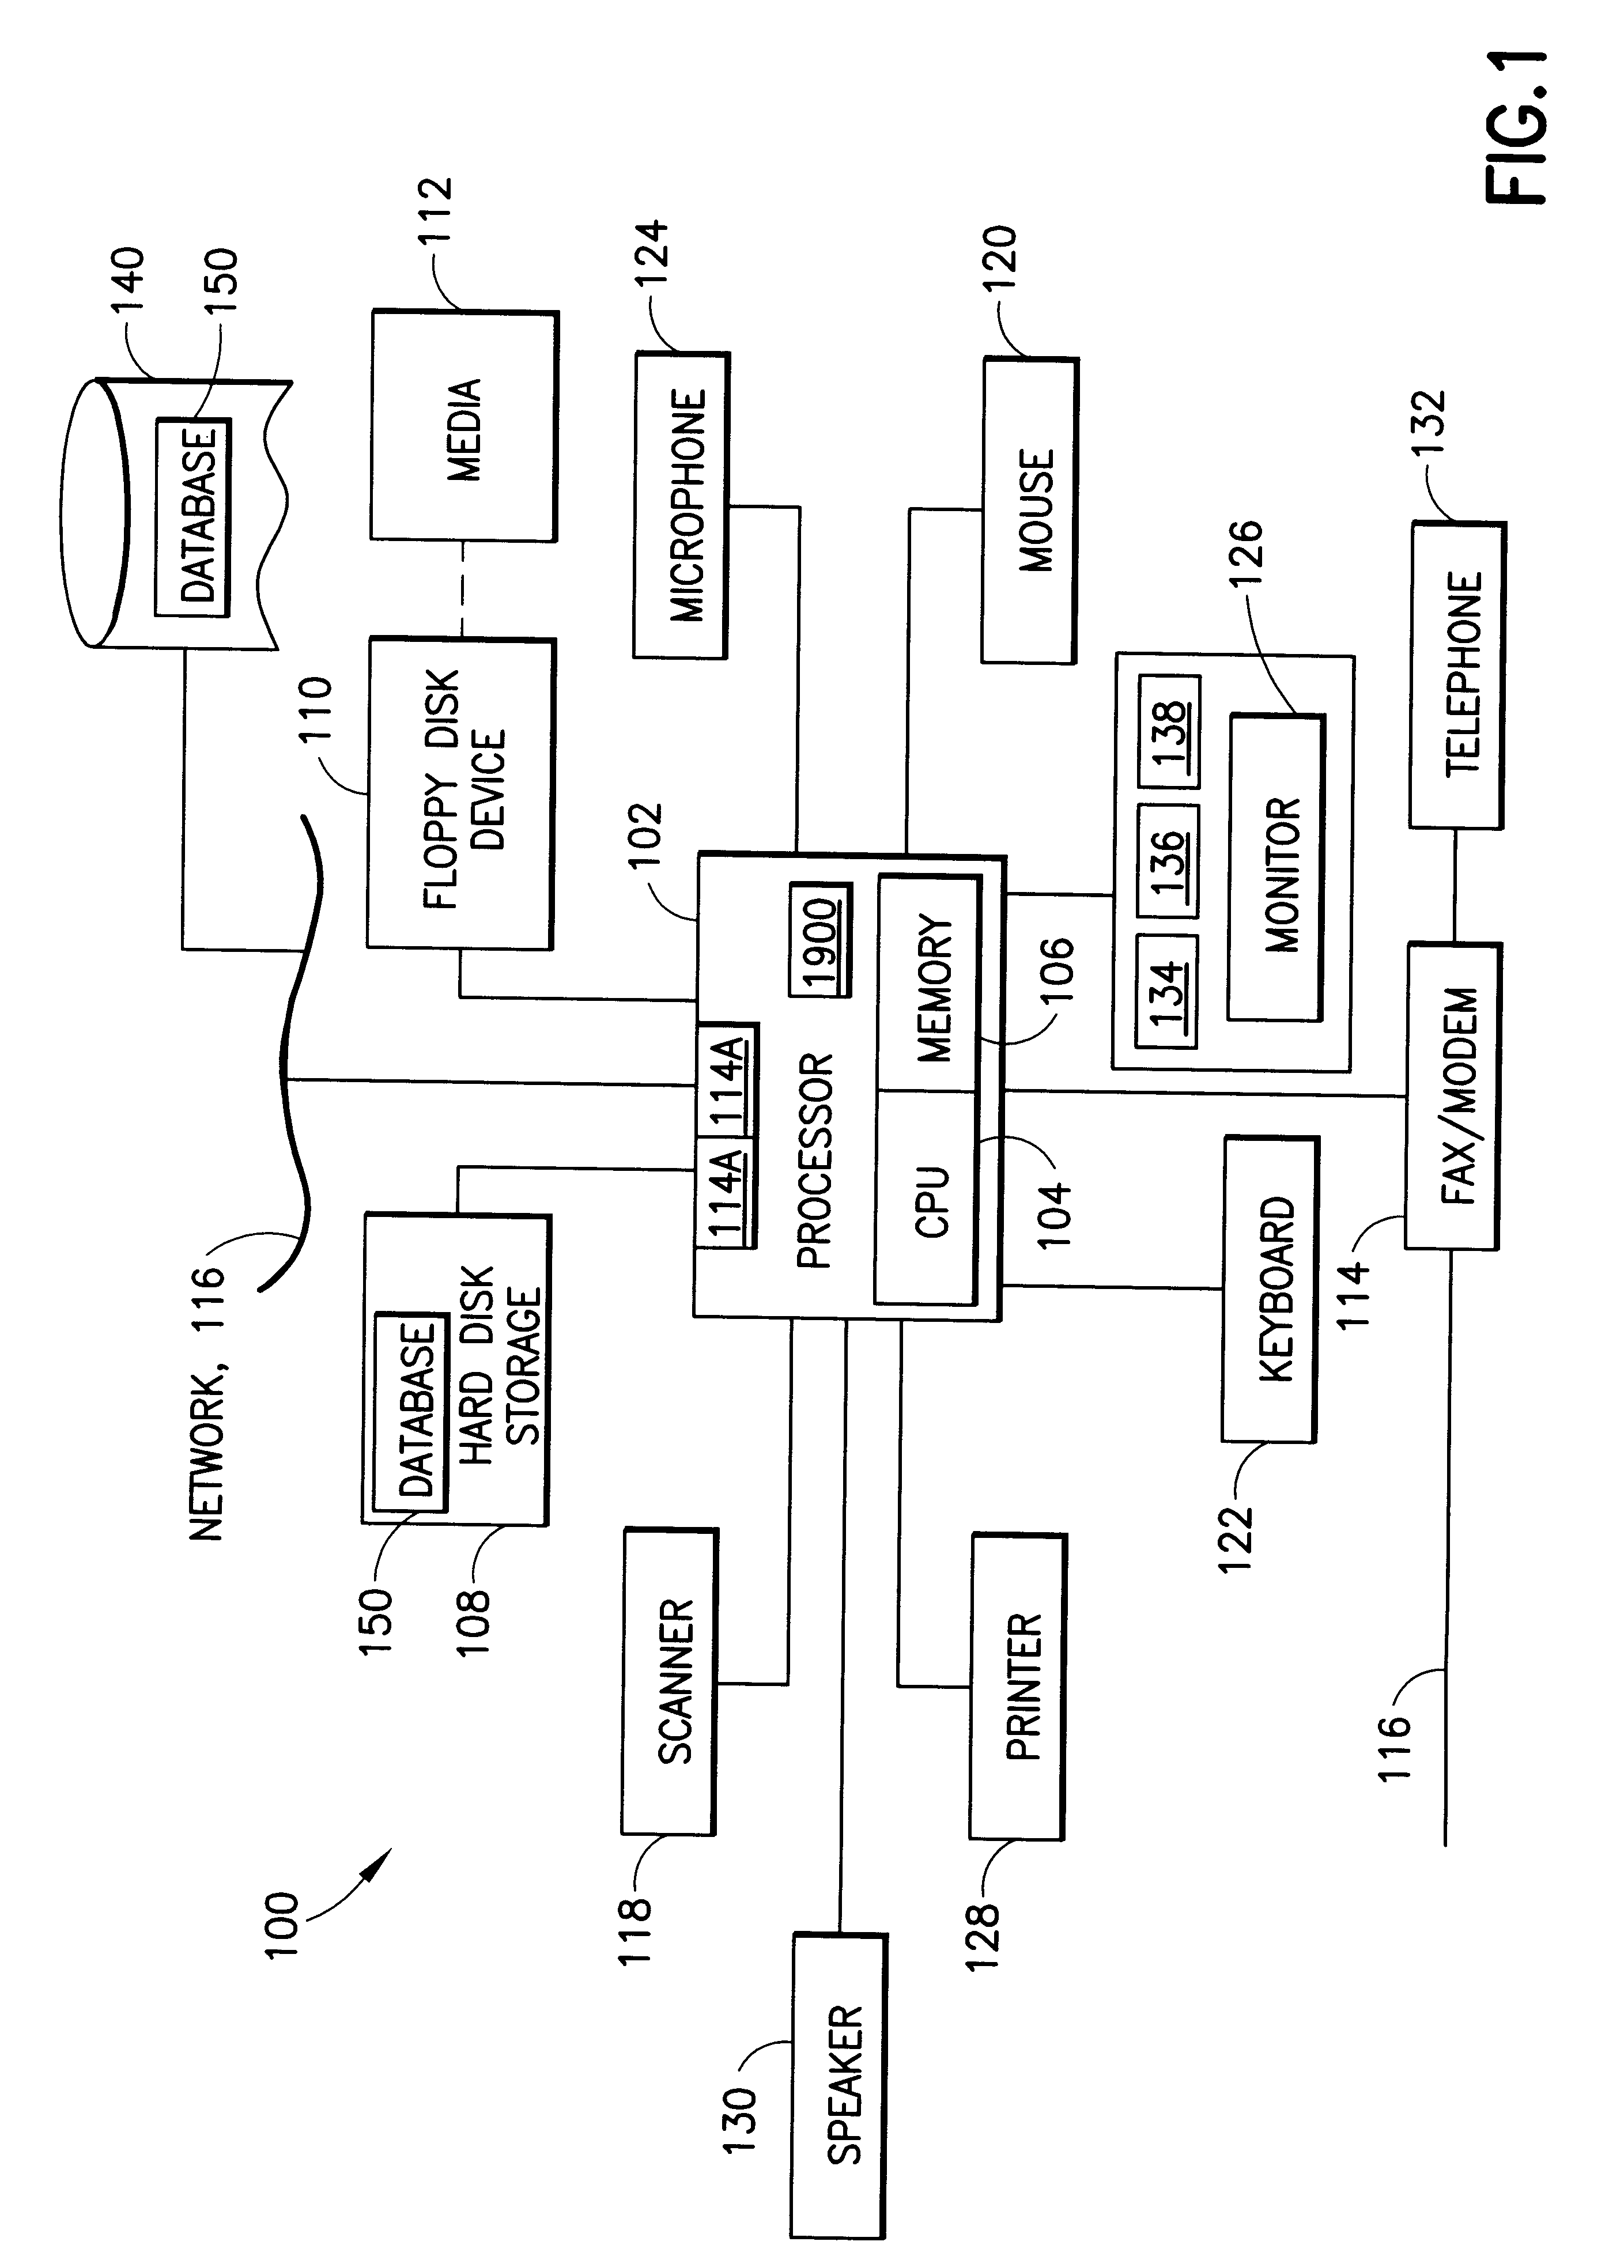 System and method for performance complex heterogeneous database queries using a single SQL expression